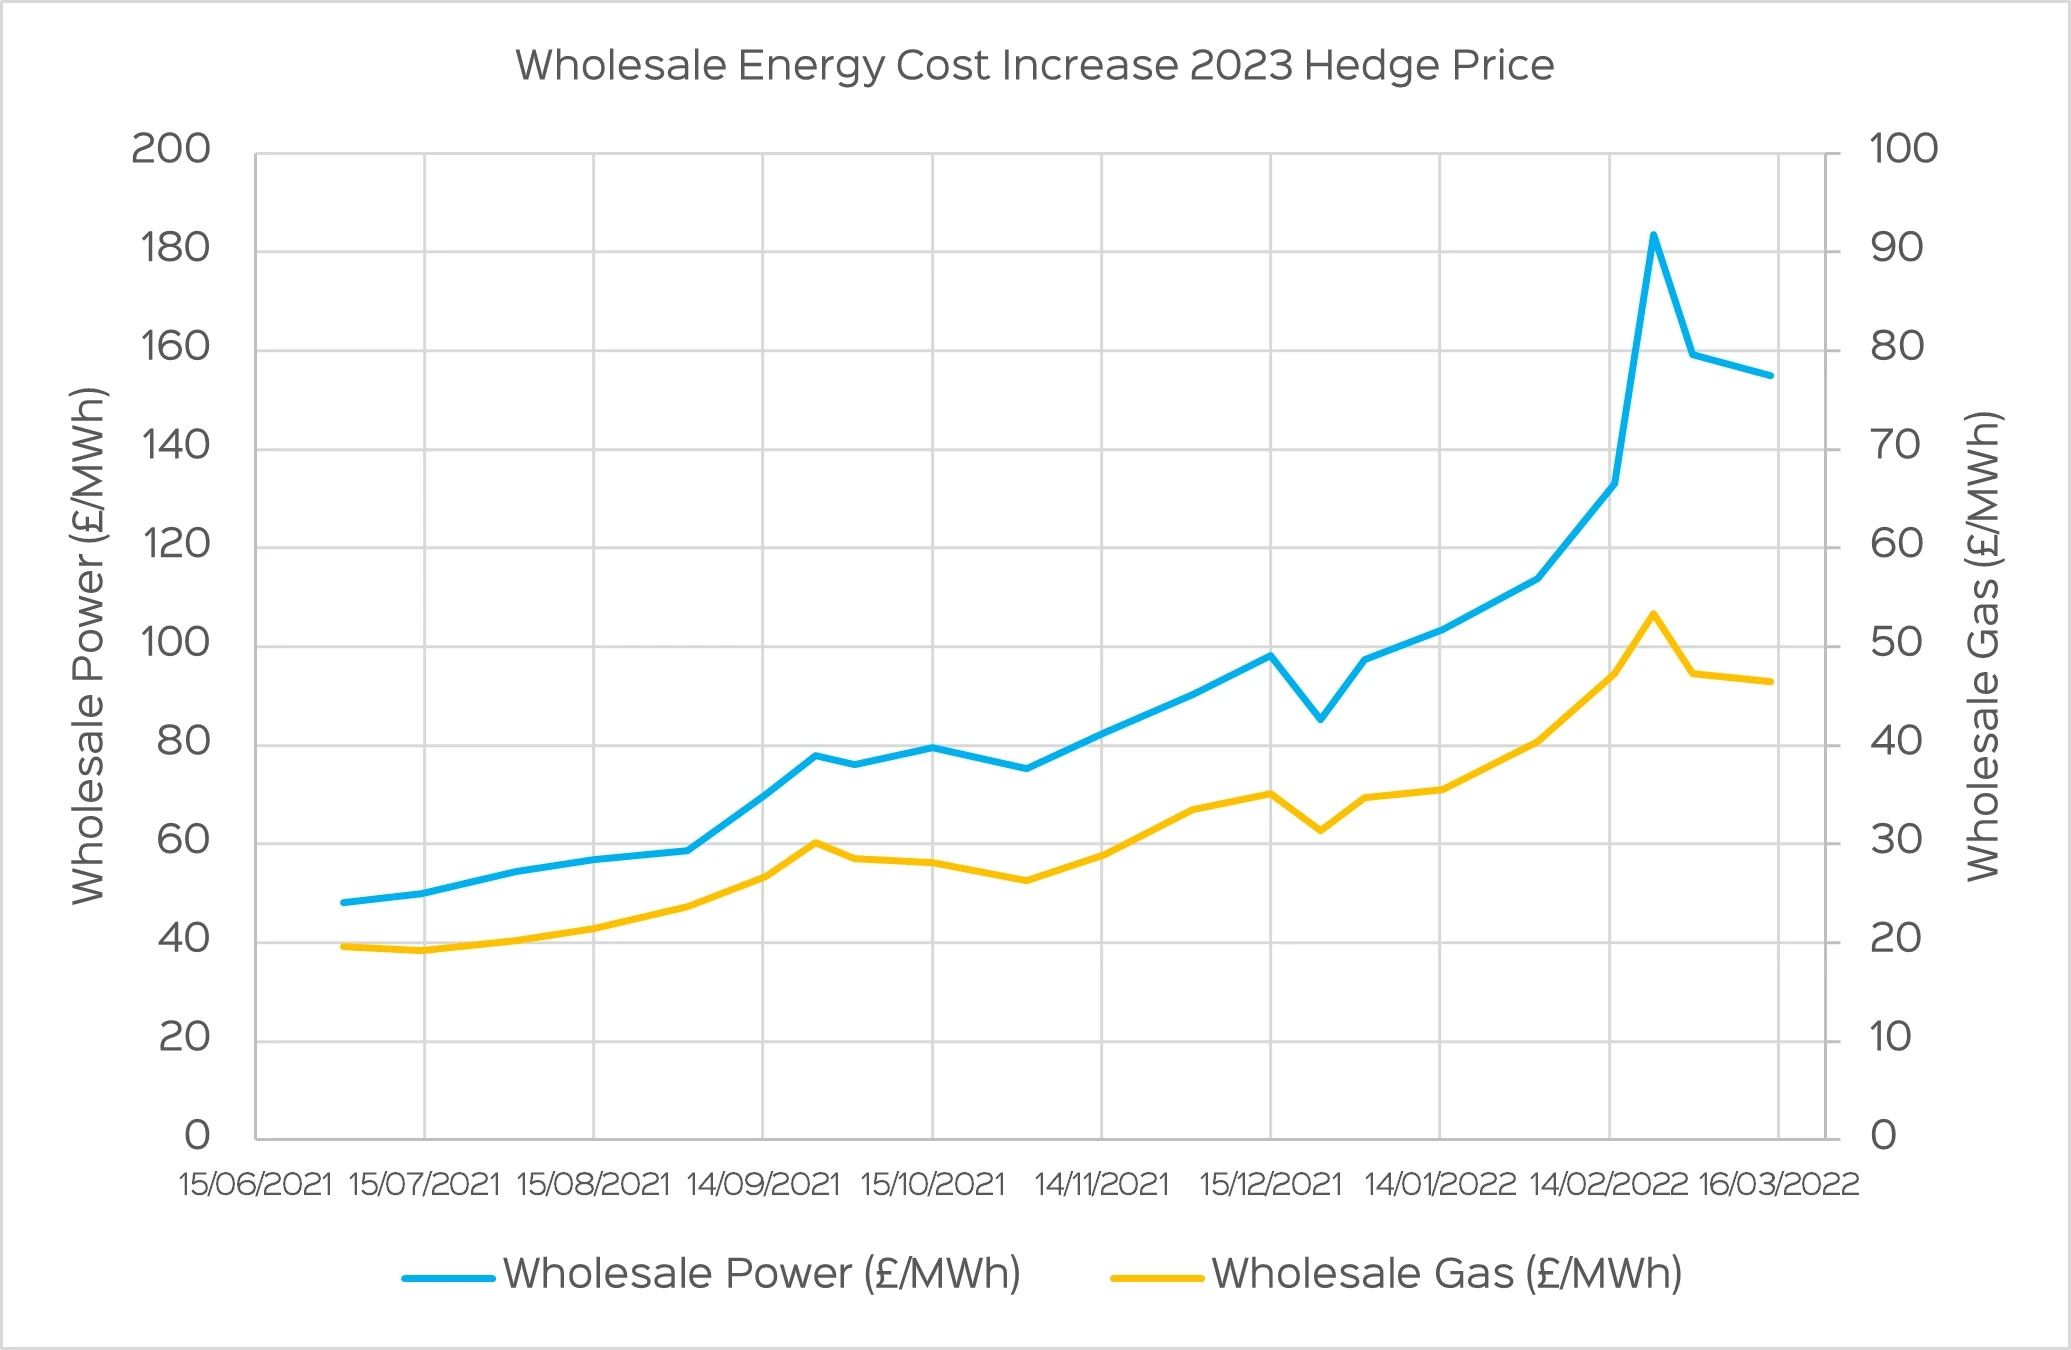 Wholesale Energy Cost Increase 2023 Hedge Price